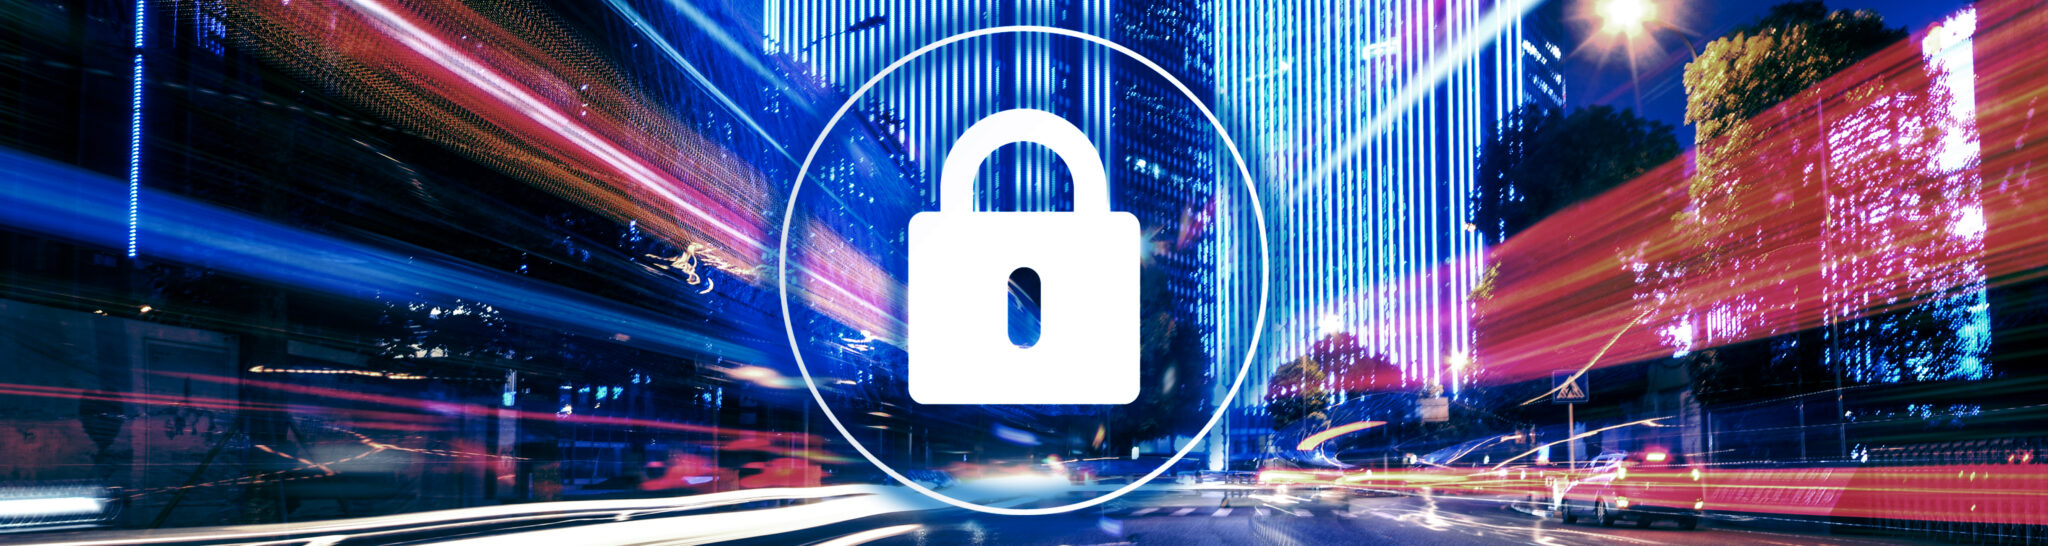 Telsy mobile security orizz lock